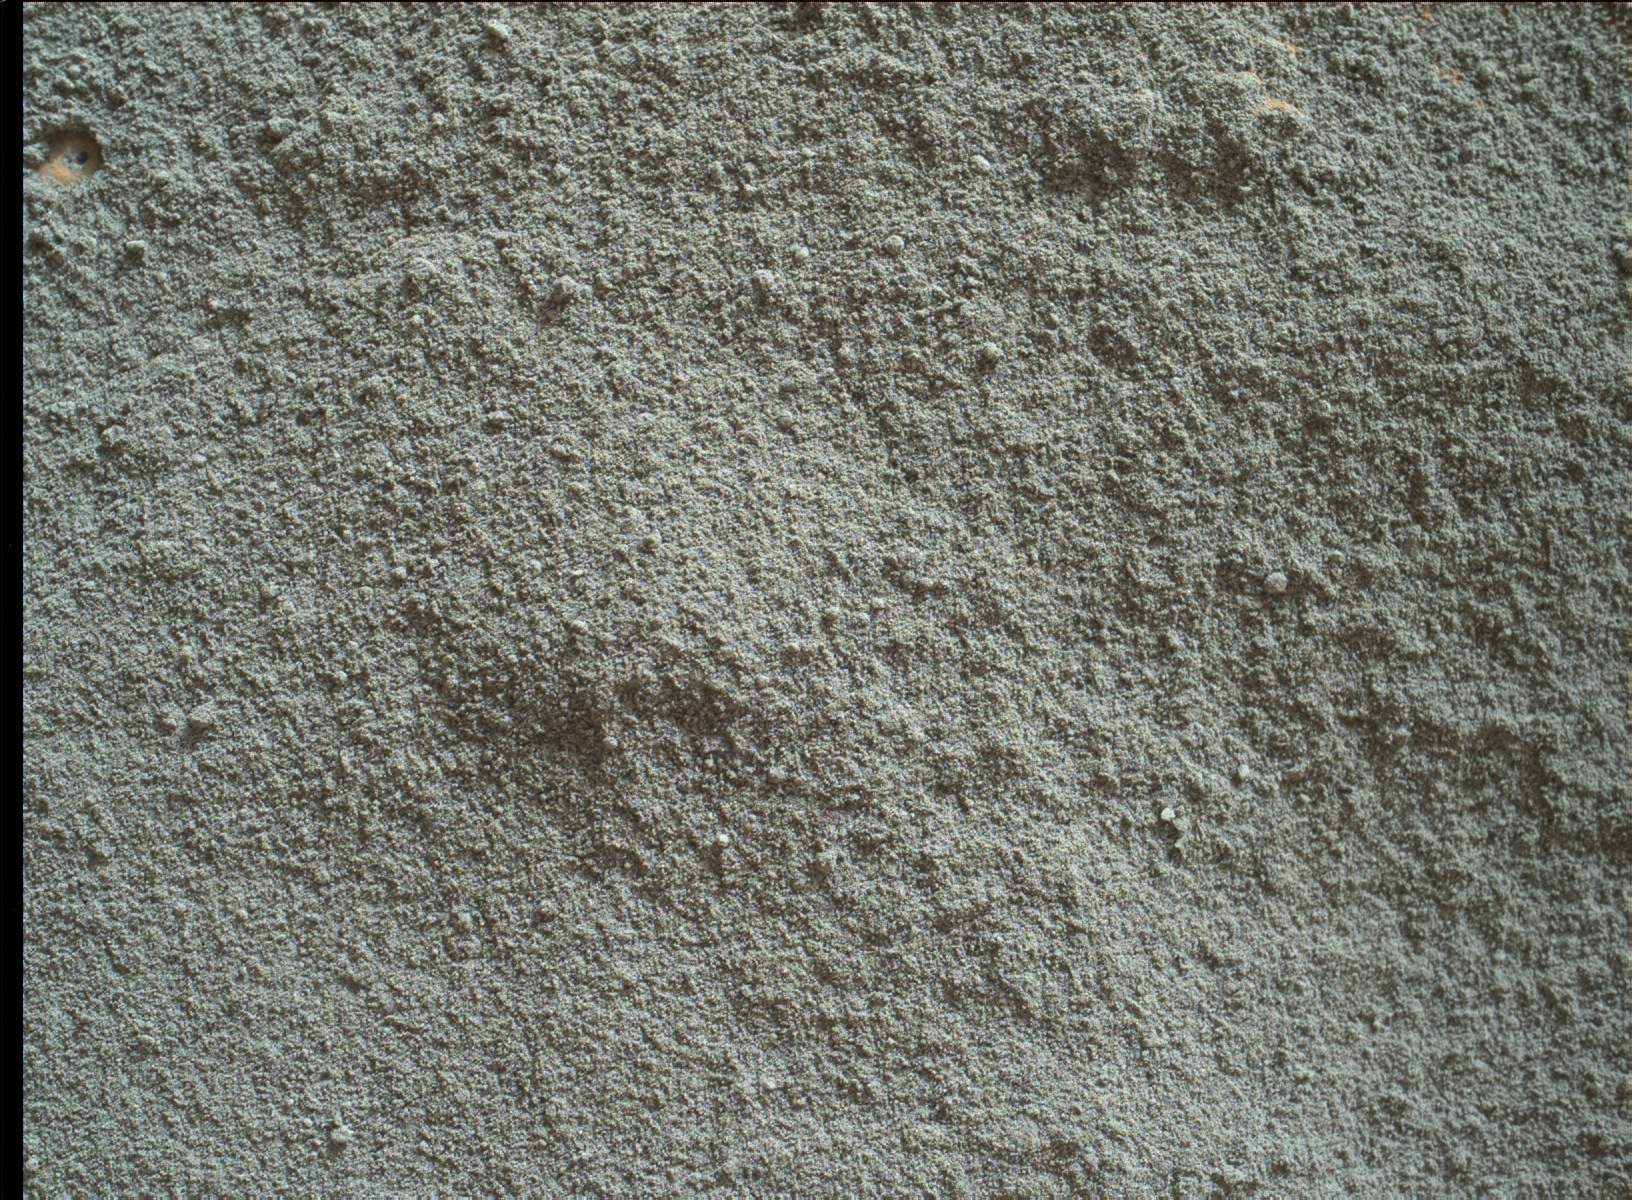 Nasa's Mars rover Curiosity acquired this image using its Mars Hand Lens Imager (MAHLI) on Sol 1359